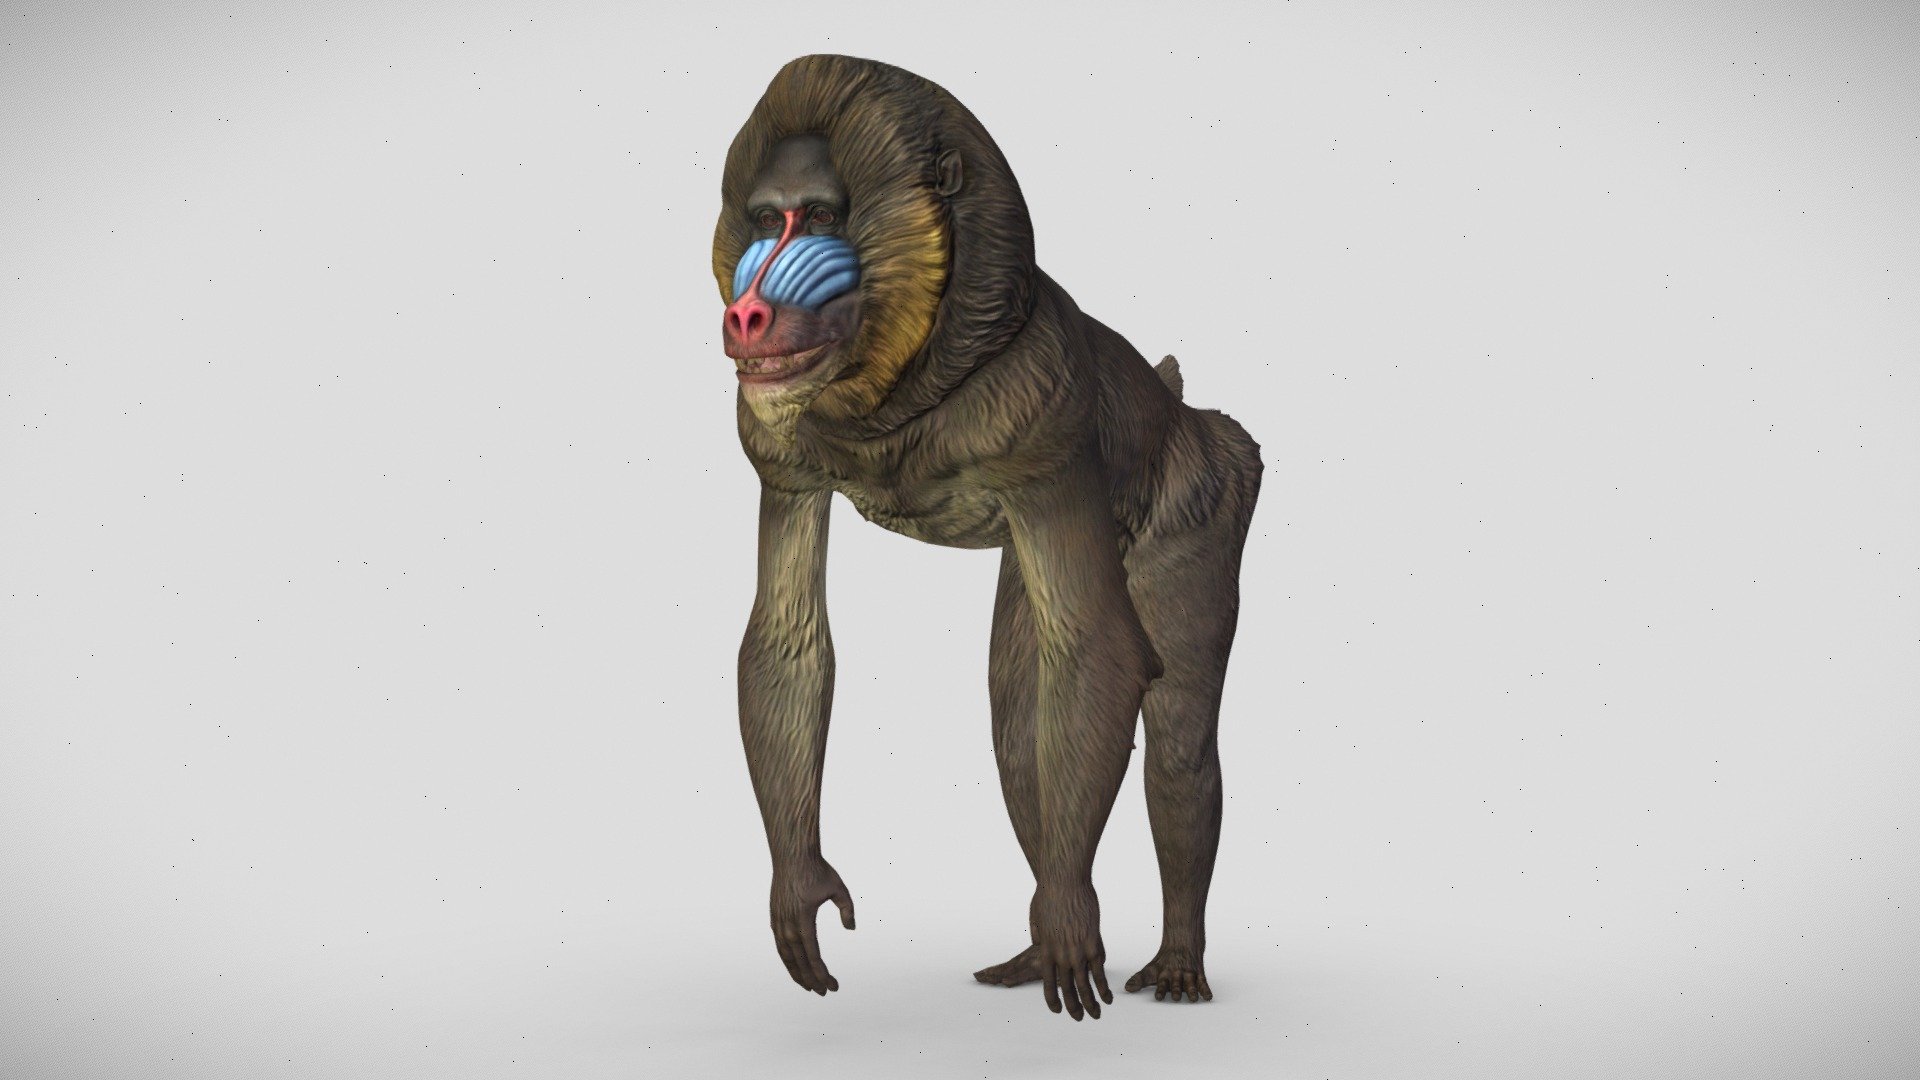 A Mandrill baboon model with textures.

Color, Specular/Gloss, Roughness, Normal, Occlusion, and Cavity maps are 2048.

Metalness map is 256.

Collada, FBX, and OBJ formats included 3d model